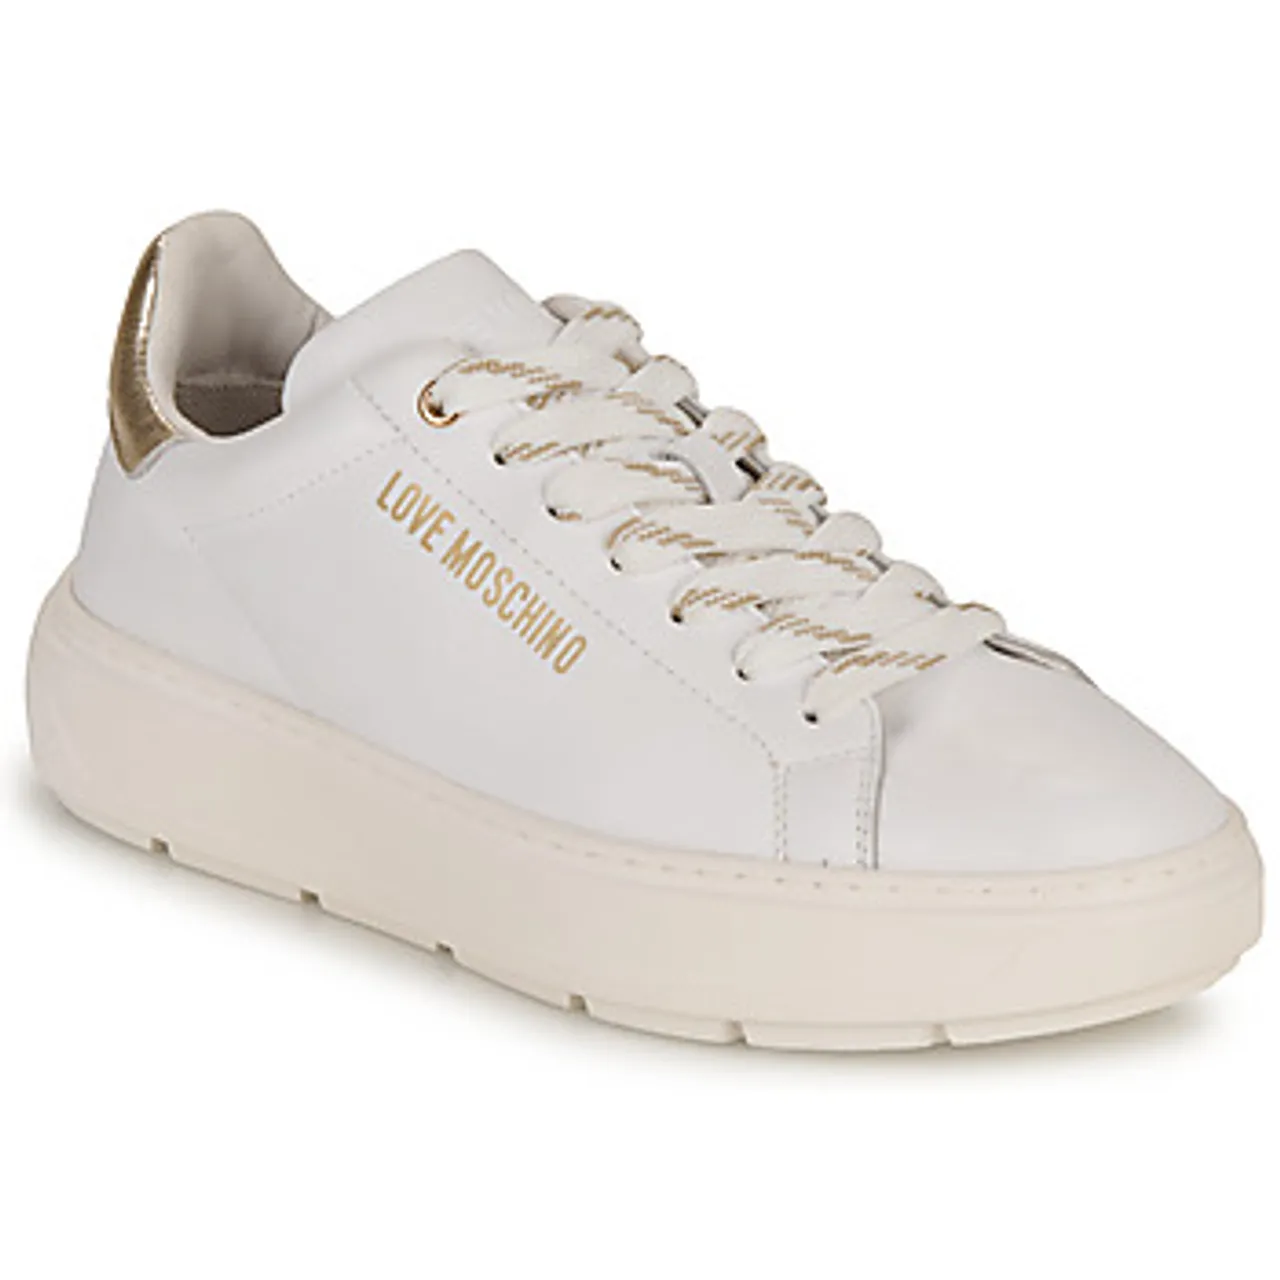 Love Moschino  BOLD LOVE  women's Shoes (Trainers) in White